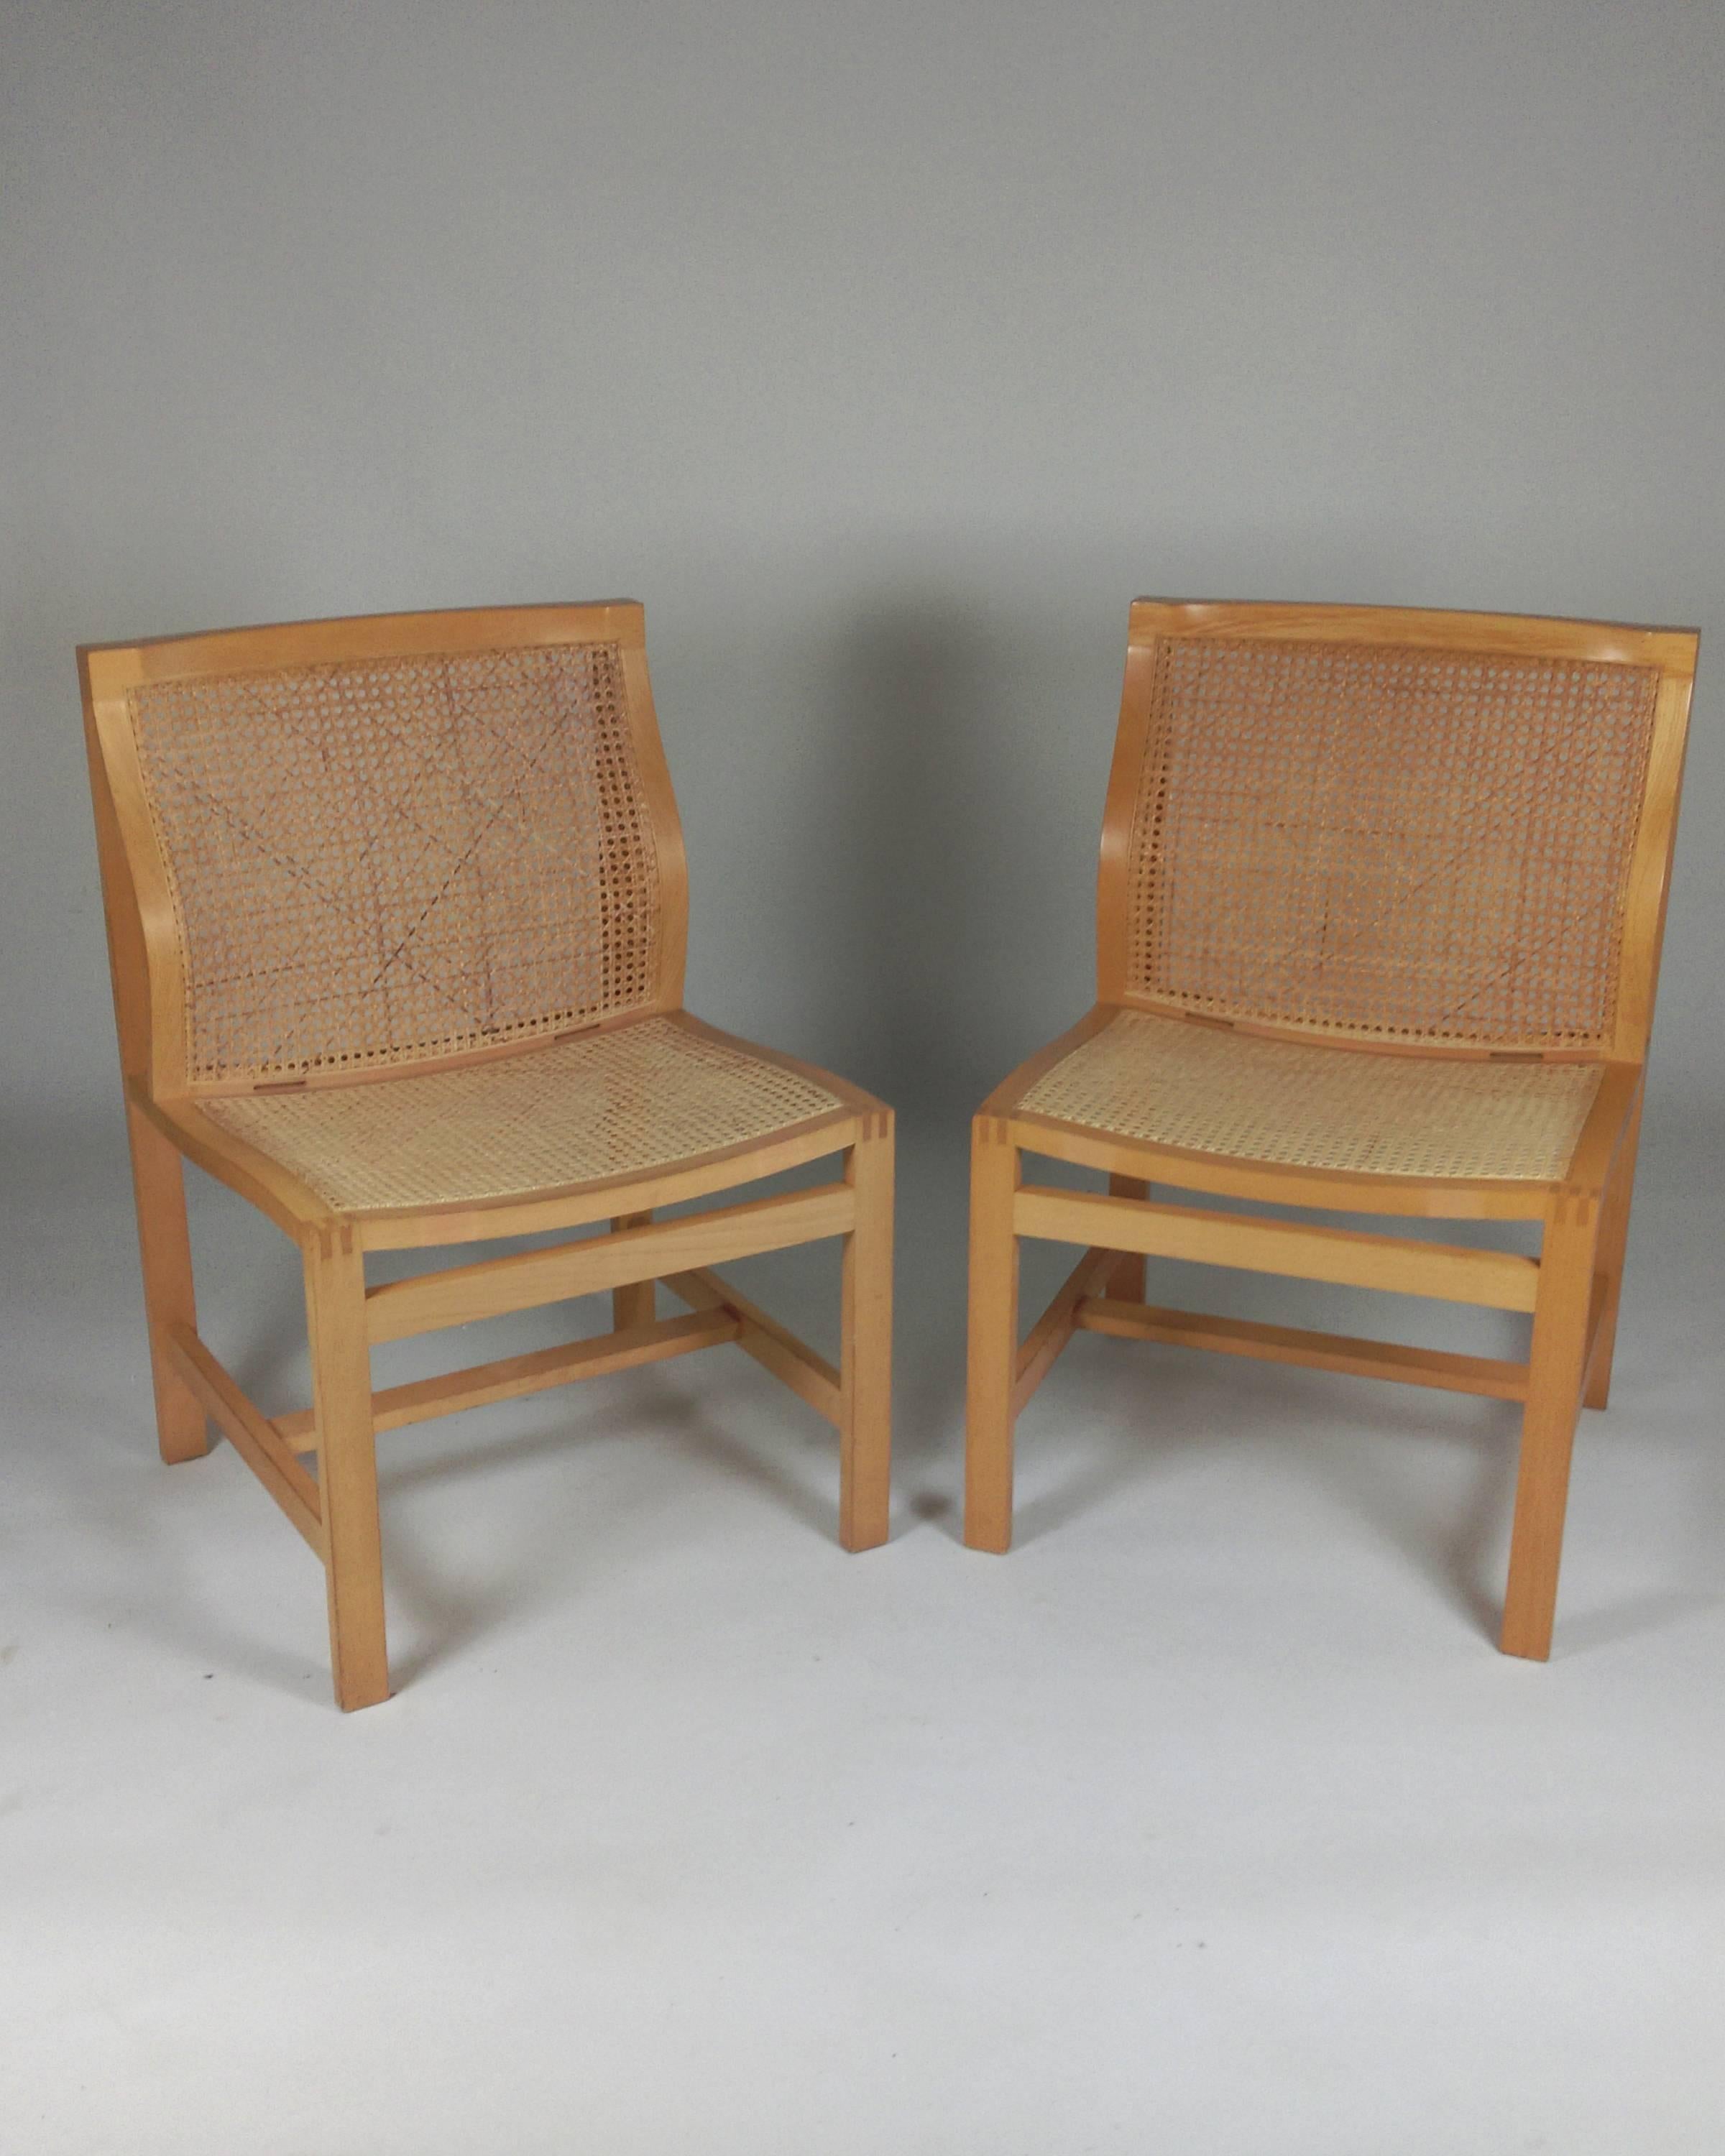 This pair of chairs, model 7511, was designed for Fredericia furniture A/S in 1968 as part of the Classic Kings Furniture series, which has been designed since 1969, named such because the Danish King Frederik IX received some of the models as gift